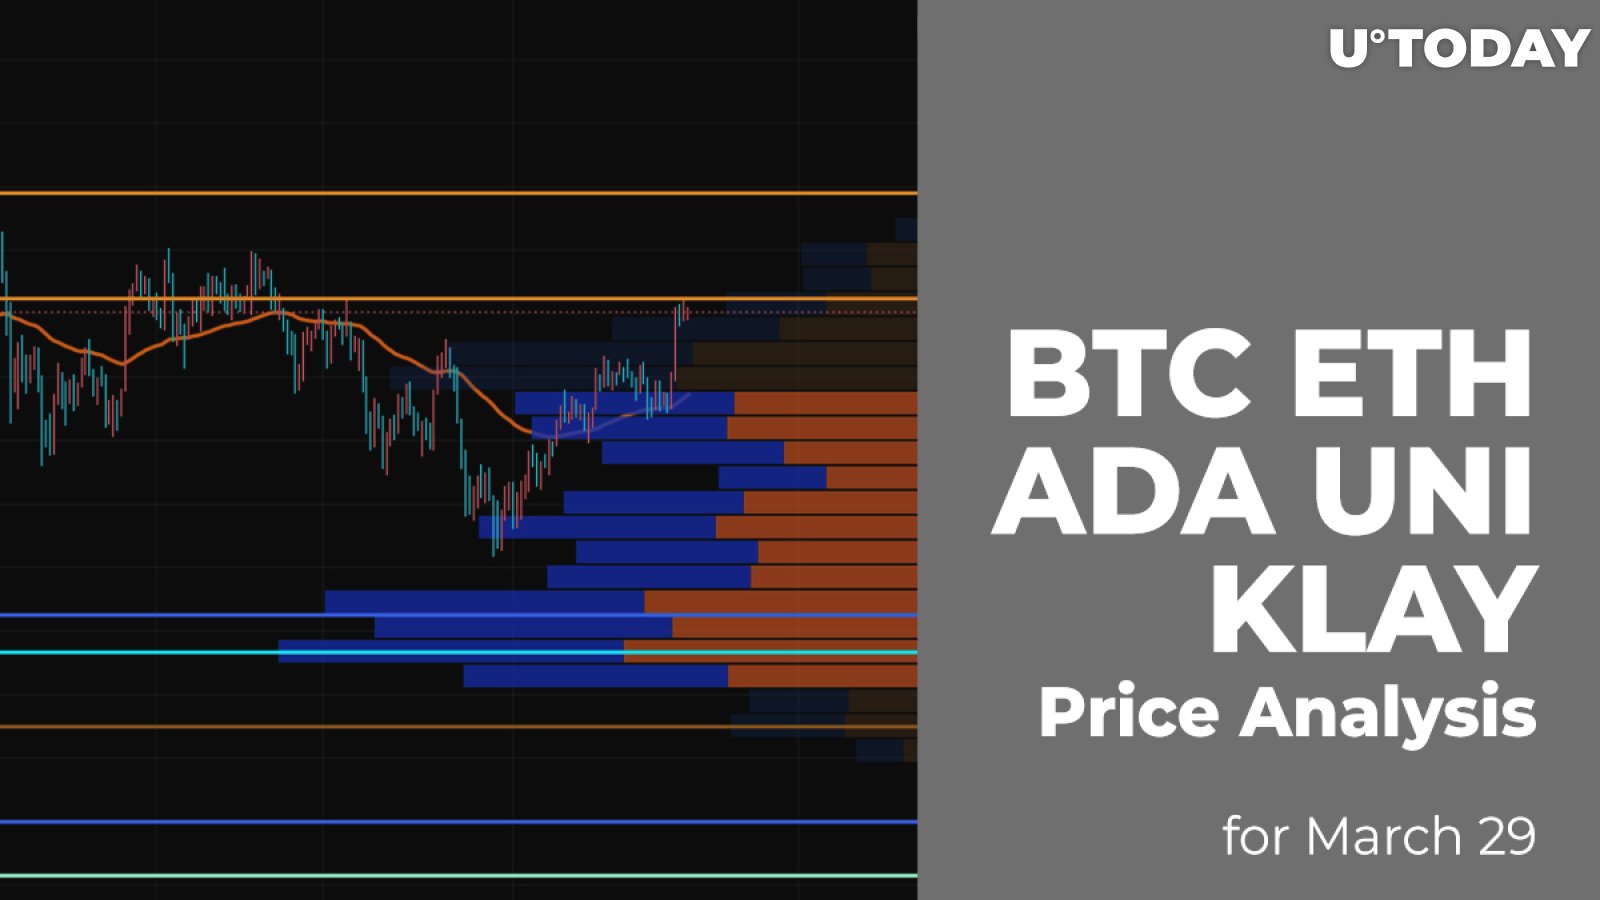 BTC, ETH, ADA, UNI and KLAY Price Analysis for March 29